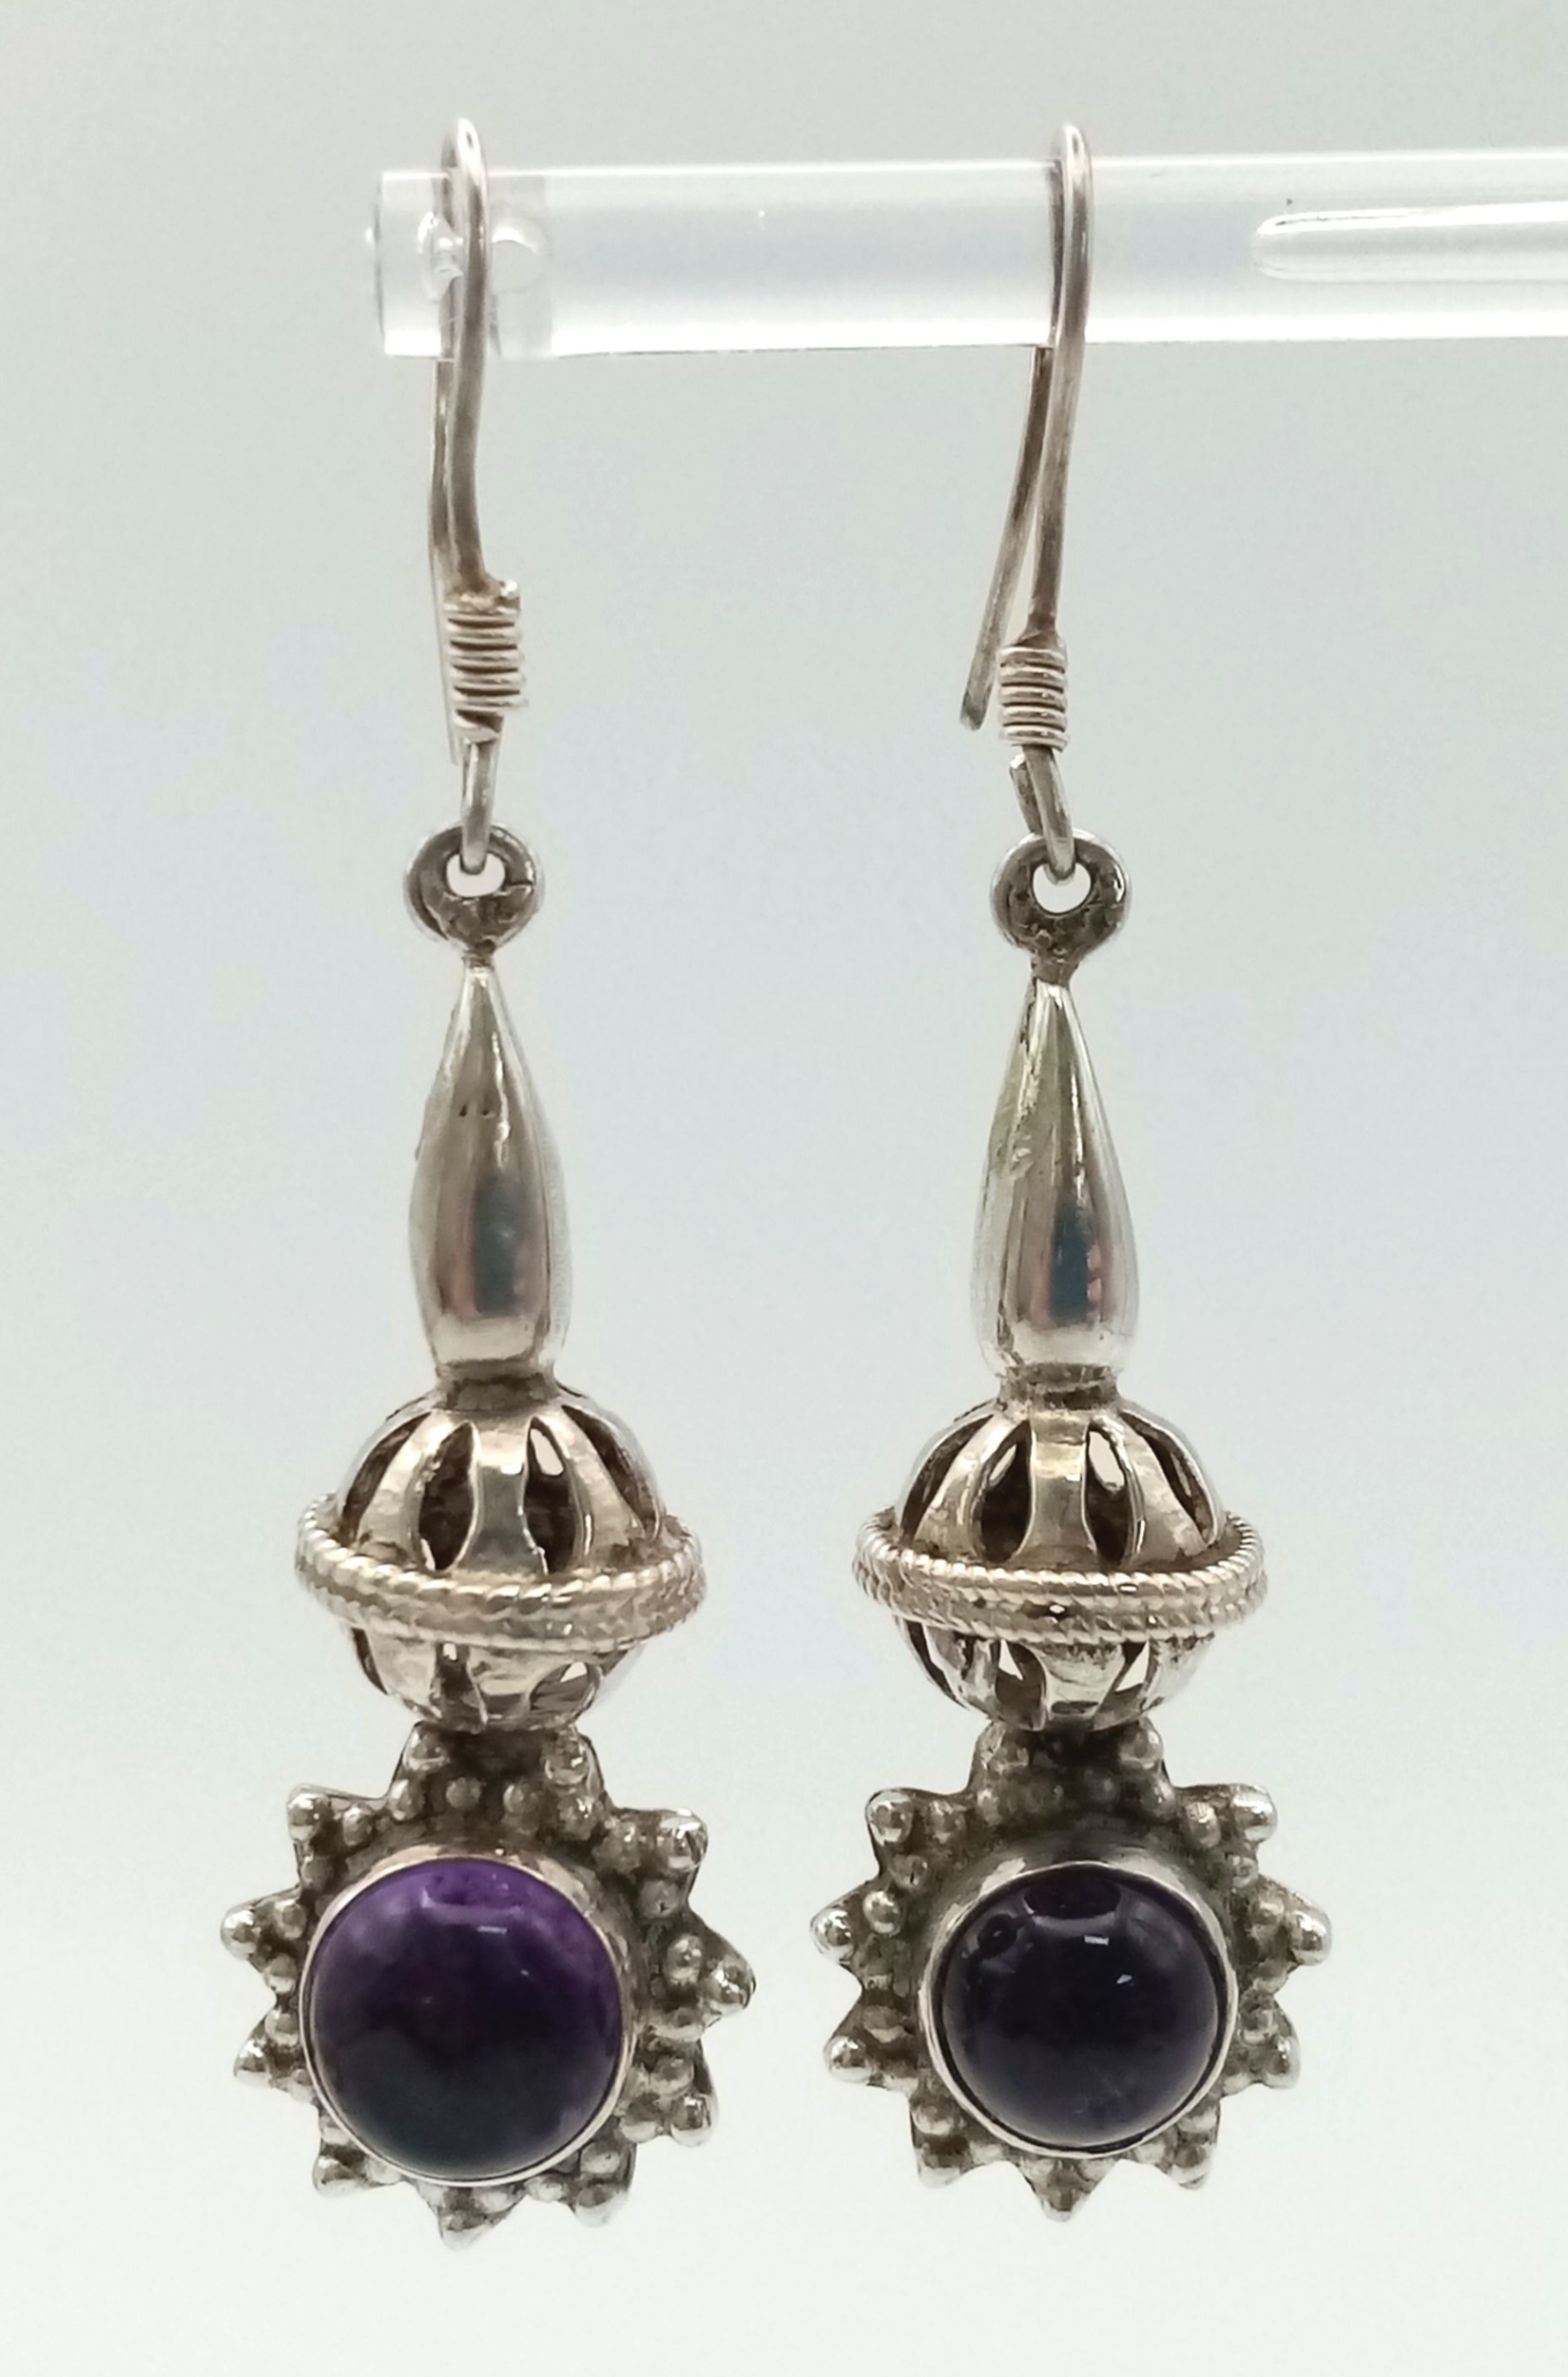 A Pair of Sterling Silver and Amethyst Drop Earrings. Decorative 4cm drops with amethyst cabochons. - Image 2 of 5